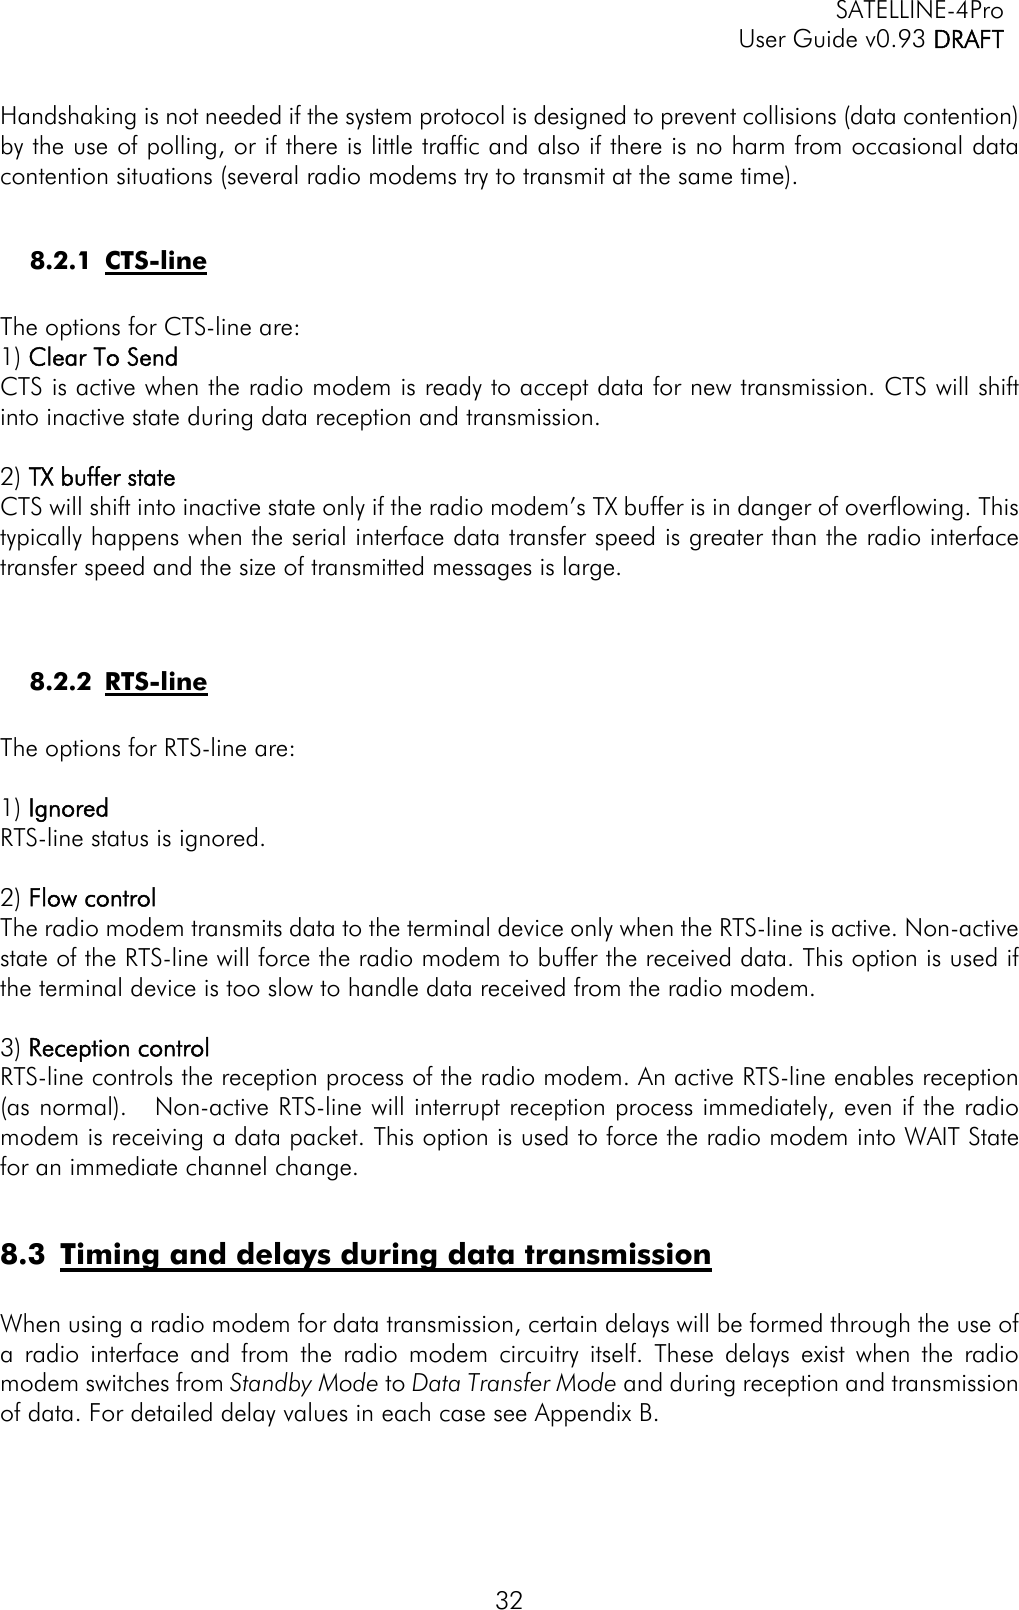   SATELLINE-4Pro   User Guide v0.93 DRAFT 32 Handshaking is not needed if the system protocol is designed to prevent collisions (data contention) by the use of polling, or if there is little traffic and also if there is no harm from occasional data contention situations (several radio modems try to transmit at the same time).  8.2.1 CTS-line  The options for CTS-line are: 1) Clear To Send CTS is active when the radio modem is ready to accept data for new transmission. CTS will shift into inactive state during data reception and transmission.   2) TX buffer state CTS will shift into inactive state only if the radio modem’s TX buffer is in danger of overflowing. This typically happens when the serial interface data transfer speed is greater than the radio interface transfer speed and the size of transmitted messages is large.     8.2.2 RTS-line  The options for RTS-line are:  1) Ignored RTS-line status is ignored.  2) Flow control The radio modem transmits data to the terminal device only when the RTS-line is active. Non-active state of the RTS-line will force the radio modem to buffer the received data. This option is used if the terminal device is too slow to handle data received from the radio modem.   3) Reception control RTS-line controls the reception process of the radio modem. An active RTS-line enables reception (as normal).   Non-active RTS-line will interrupt reception process immediately, even if the radio modem is receiving a data packet. This option is used to force the radio modem into WAIT State for an immediate channel change.   8.3 Timing and delays during data transmission  When using a radio modem for data transmission, certain delays will be formed through the use of a radio interface and from the radio modem circuitry itself. These delays exist when the radio modem switches from Standby Mode to Data Transfer Mode and during reception and transmission of data. For detailed delay values in each case see Appendix B.  